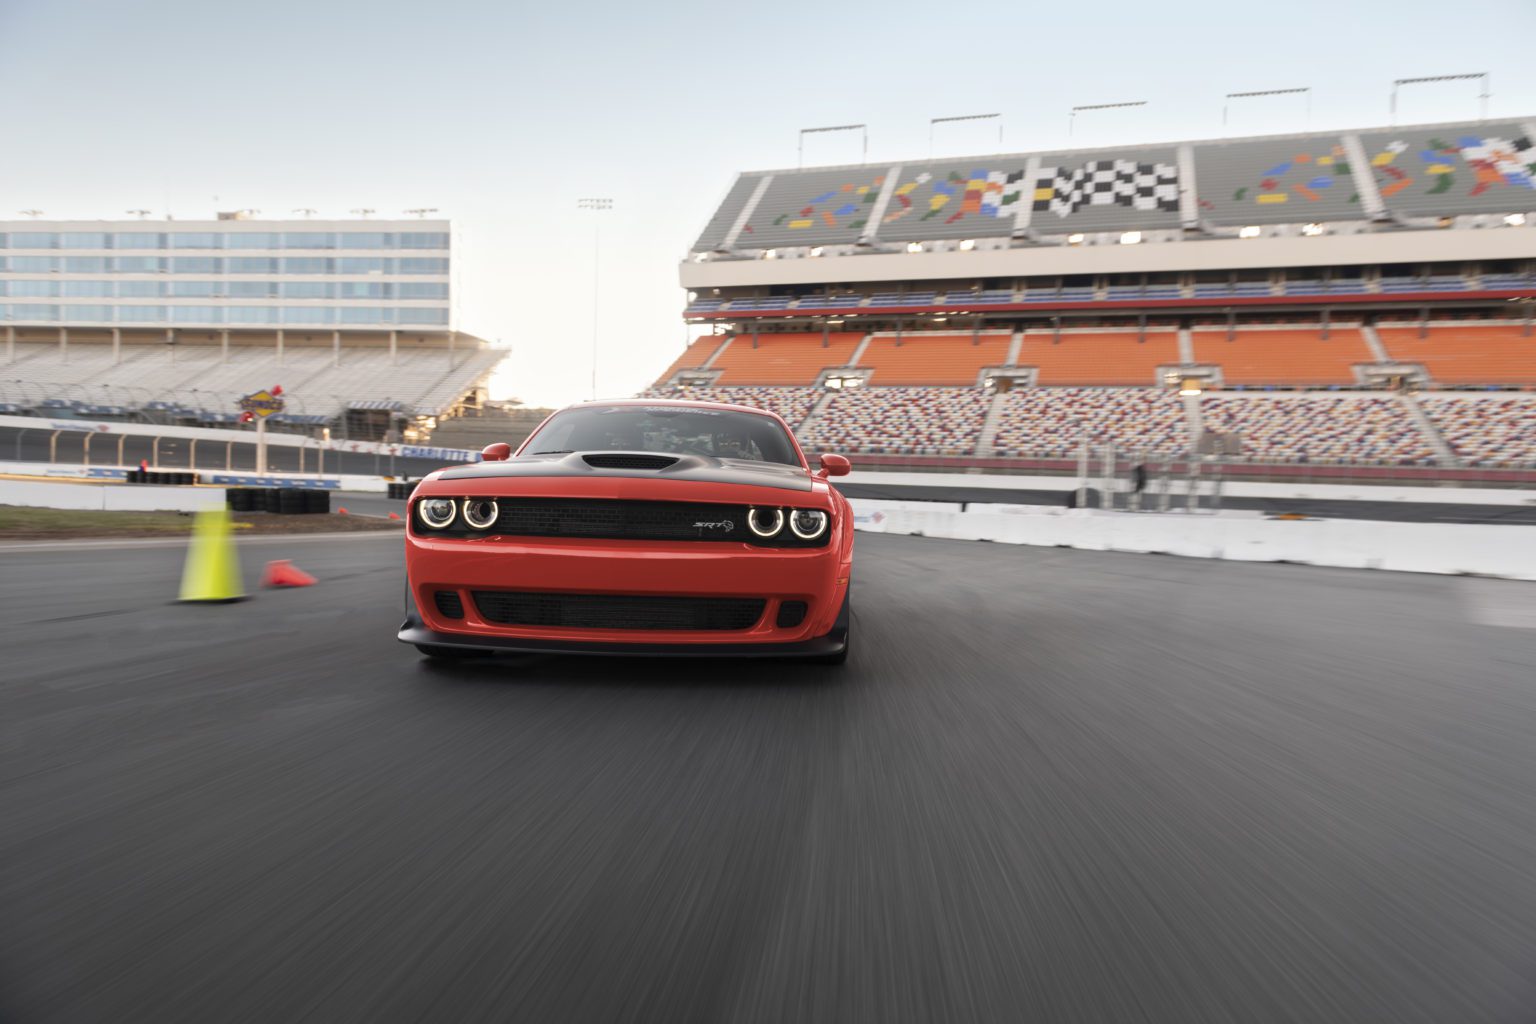 Dodge Challenger Hellcat from Xtreme Xperience driving on a racetrack.